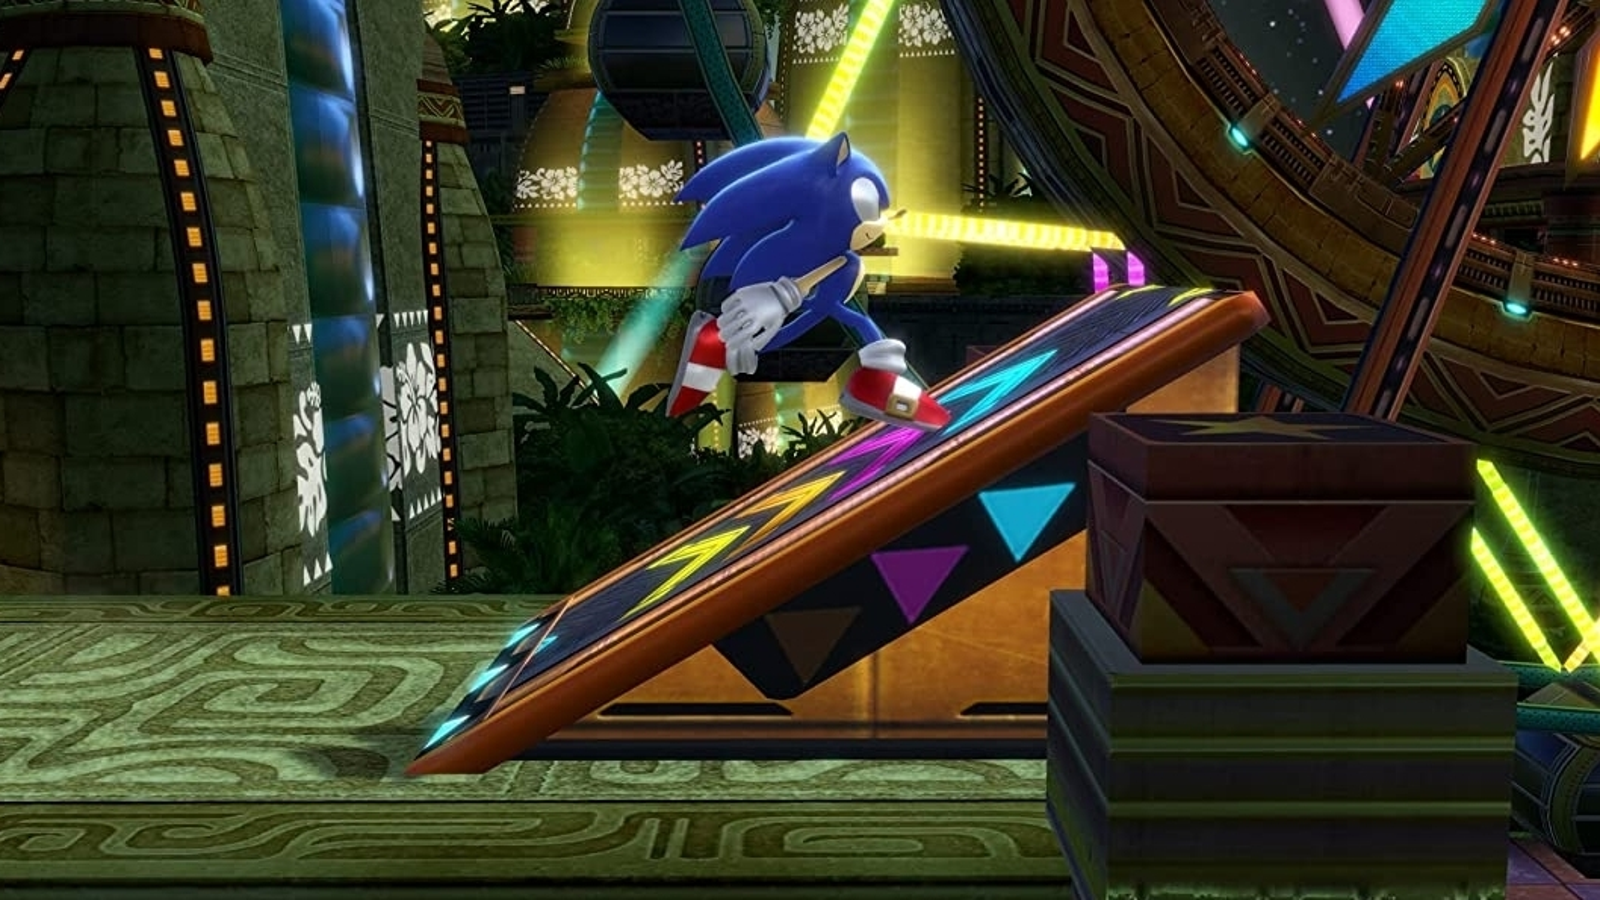 Sonic Colors: Ultimate Review - Giving a Classic Title a Fresh Coat of  Paint - GamerBraves